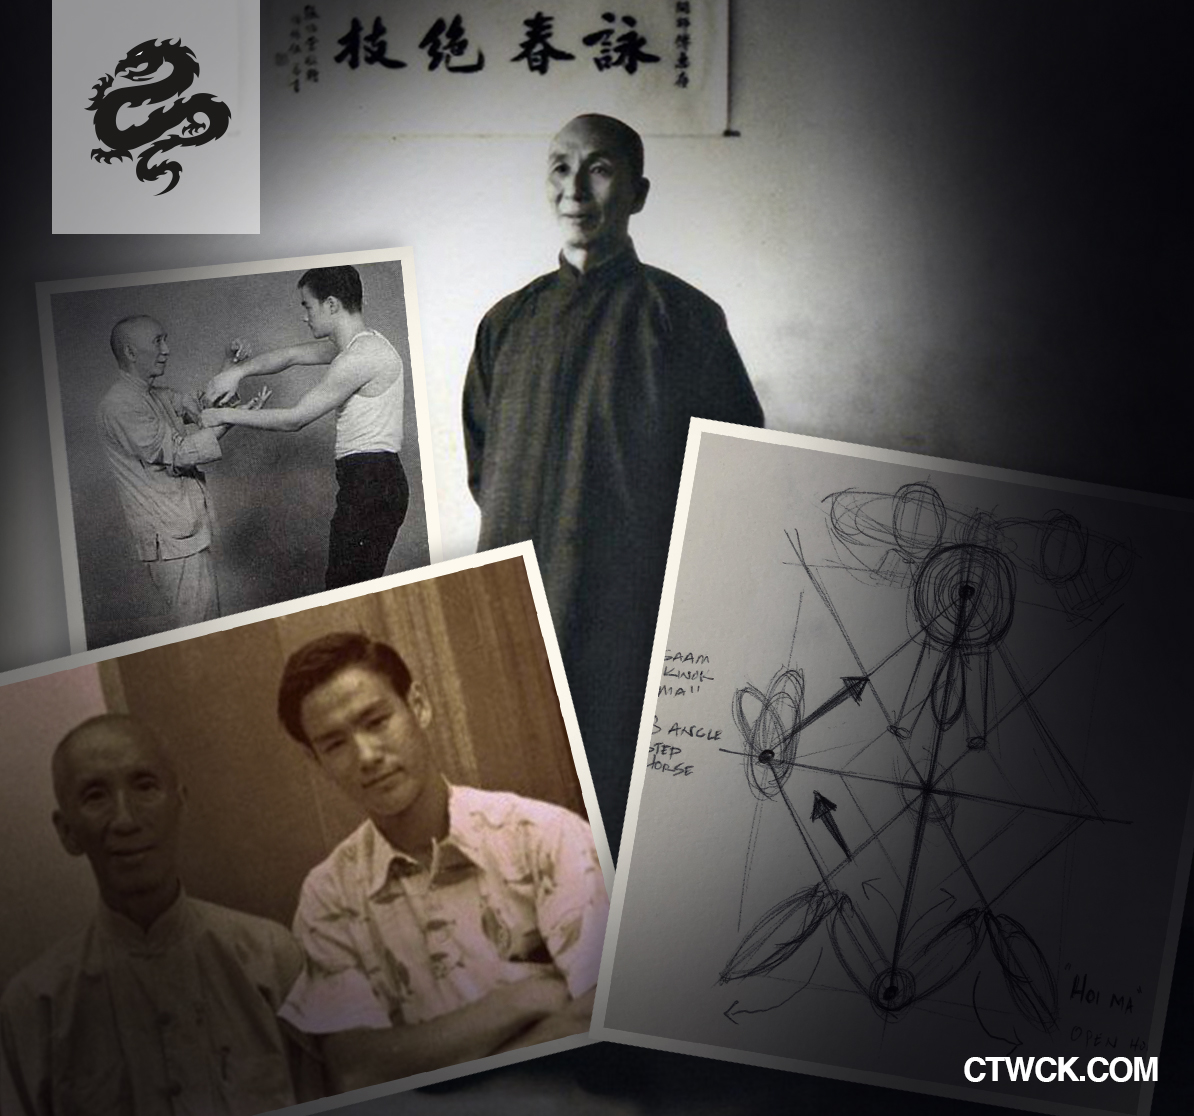 ct-wing-chun-yip-man-archive-video-Feature-2022